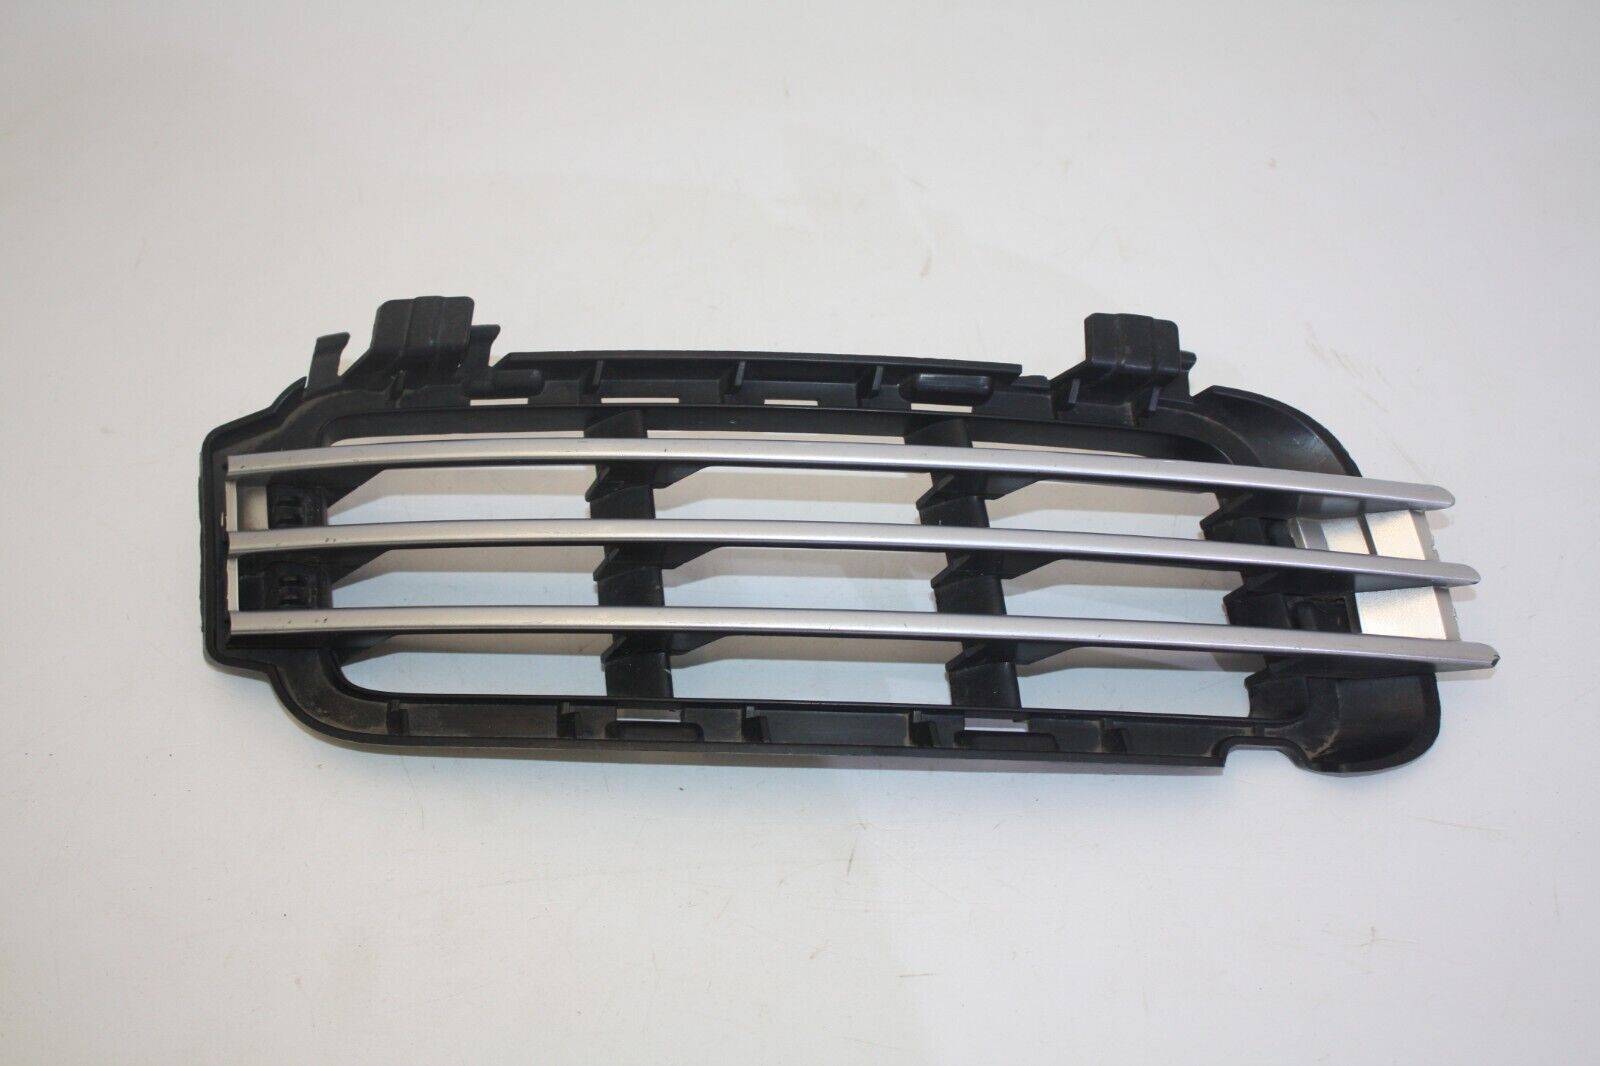 Range Rover Vogue Front Bumper Right Side Grill CK52 17F908 AA Genuine 176234633990